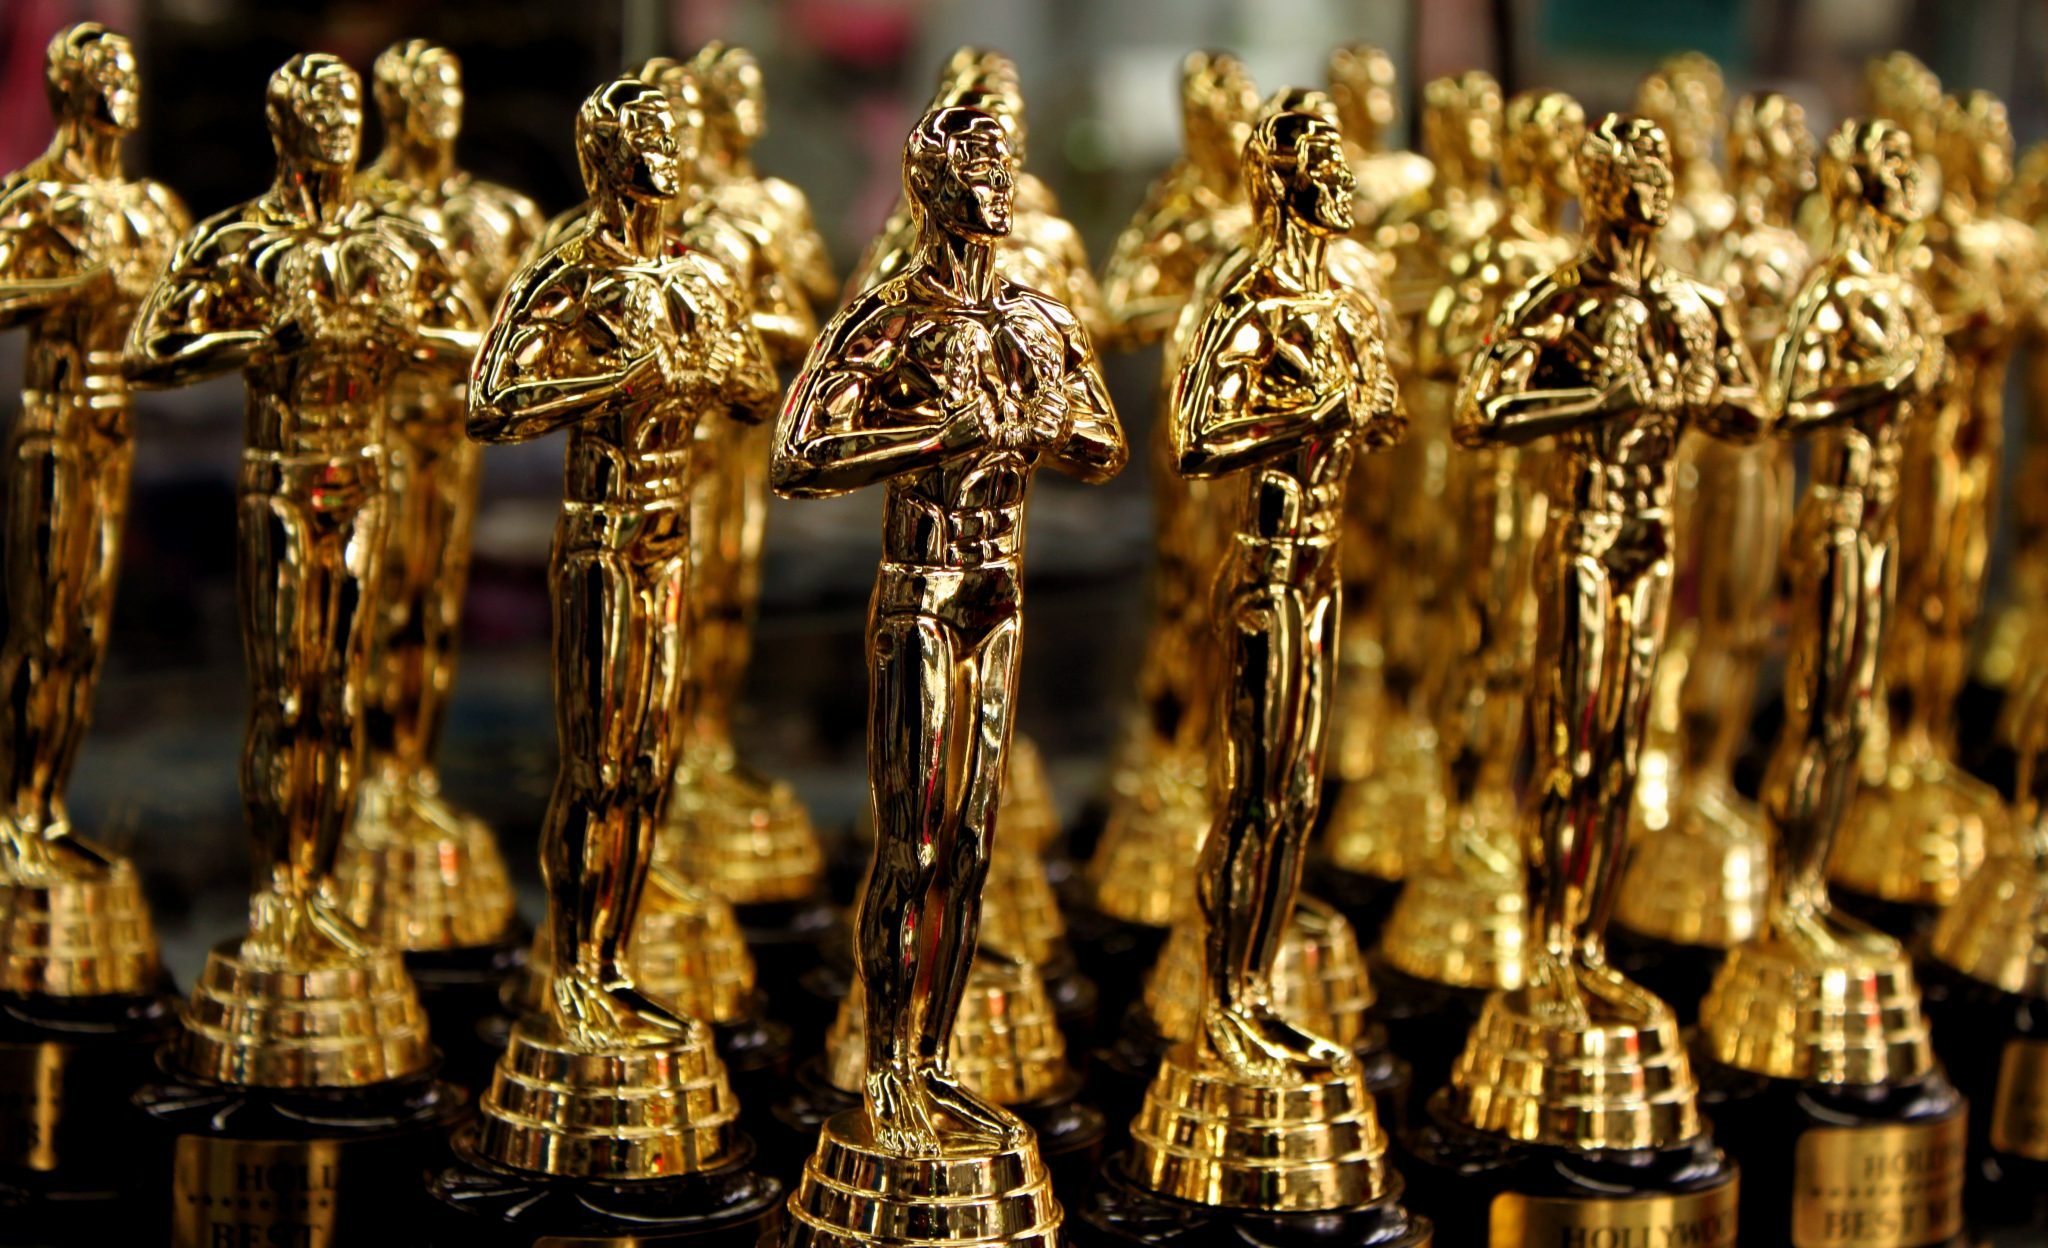 A series of gold Oscar statues on display.